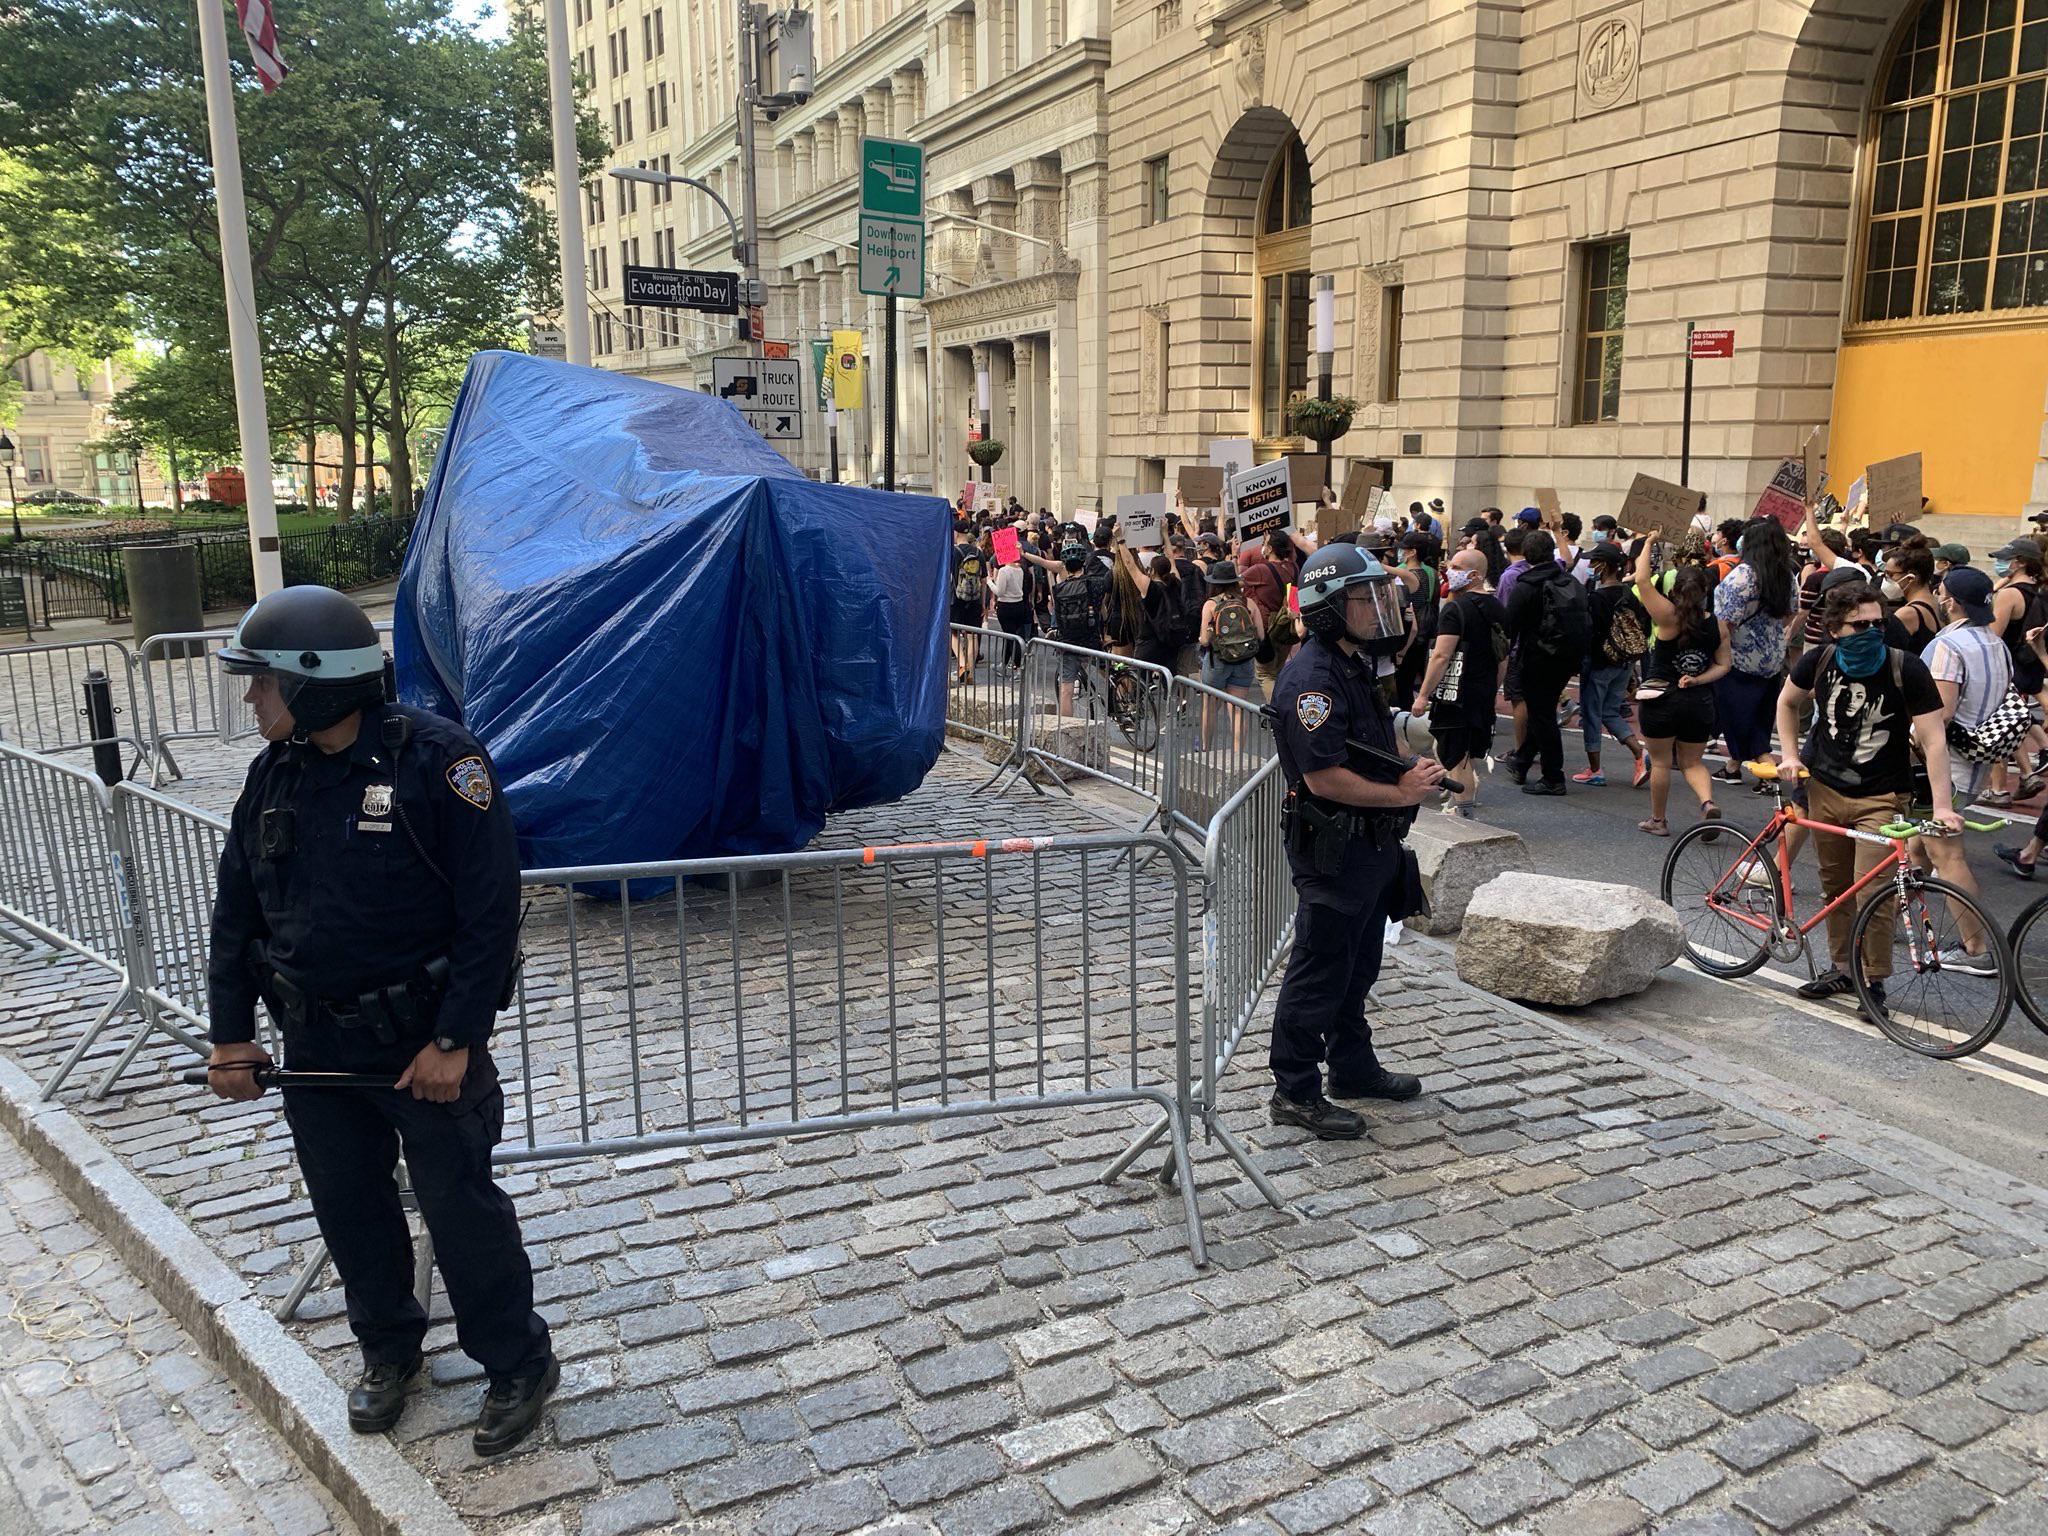 NYPD+protecting+the+Wall+Street+Bull+from+protesters+is+way+too+2020+vibe+for+me.